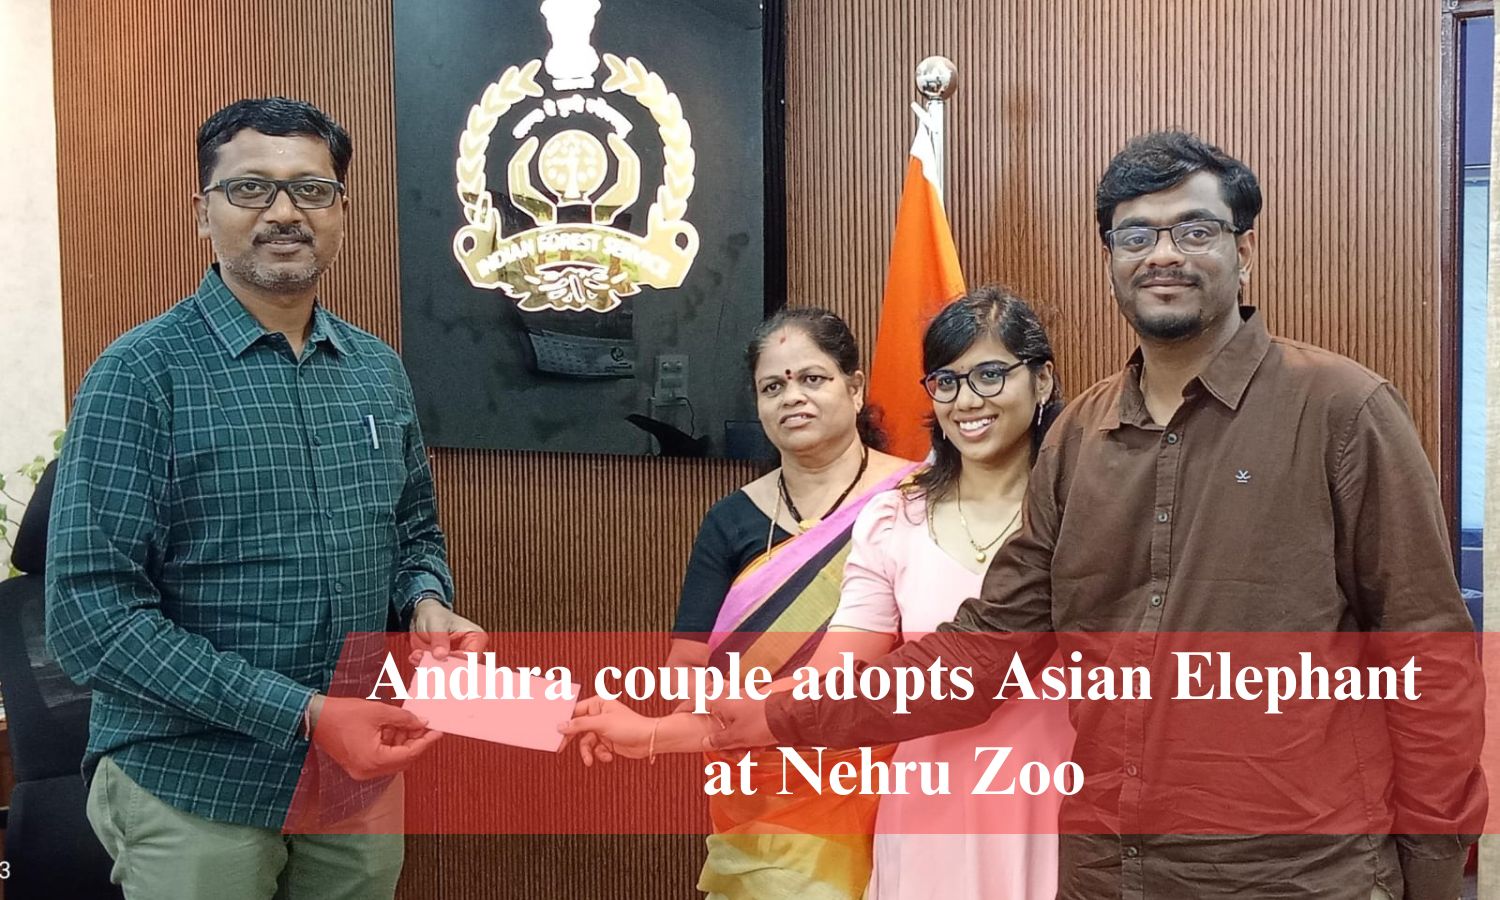 Andhra Couple Adopts Asian Elephant At Nehru Zoo